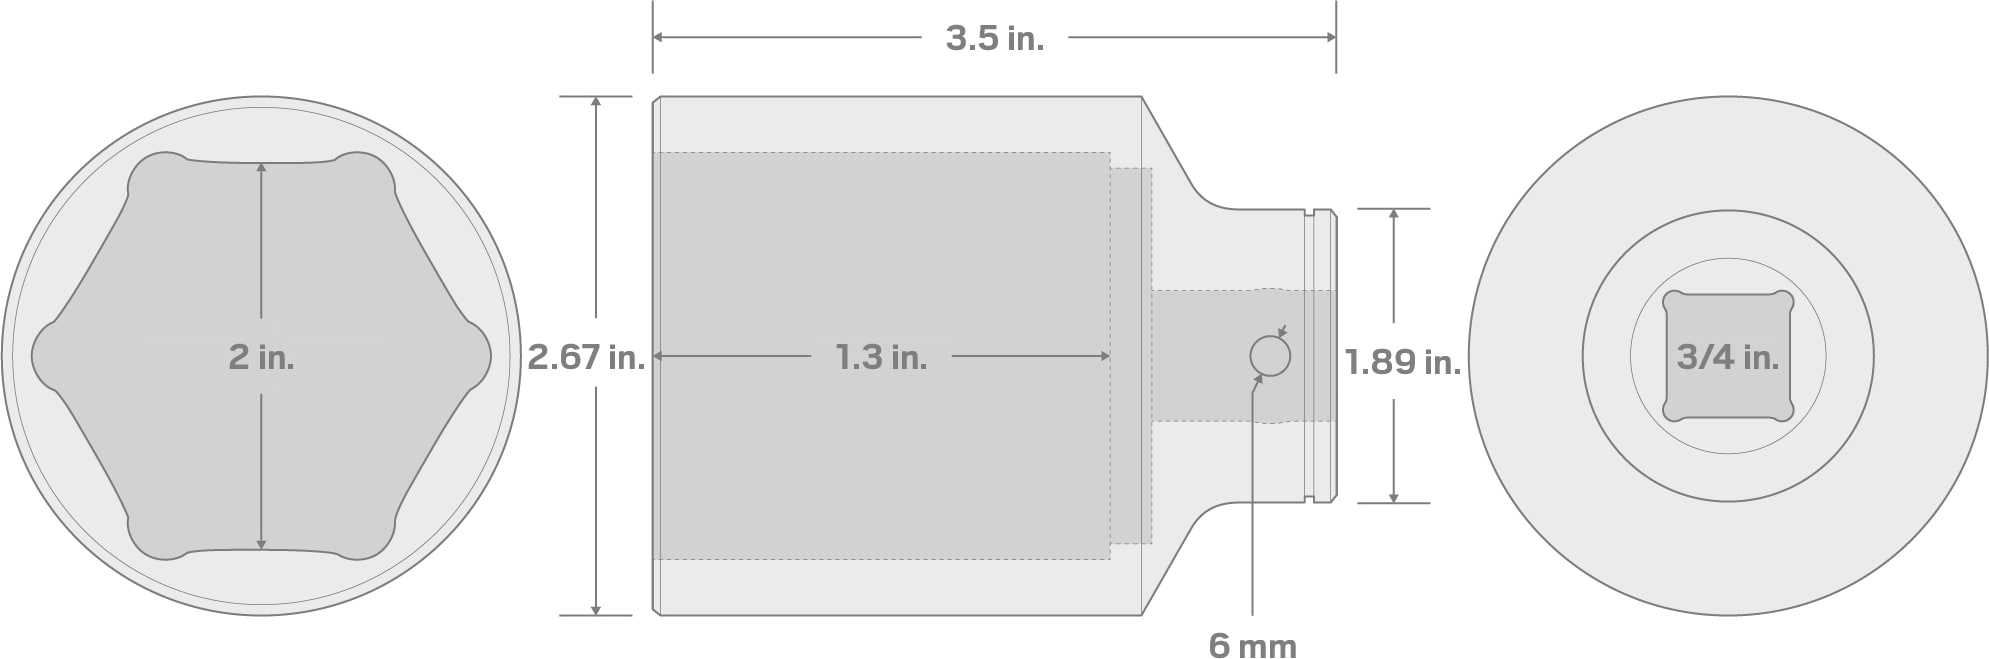 Specs for 3/4 Inch Drive x 2 Inch Deep 6-Point Socket